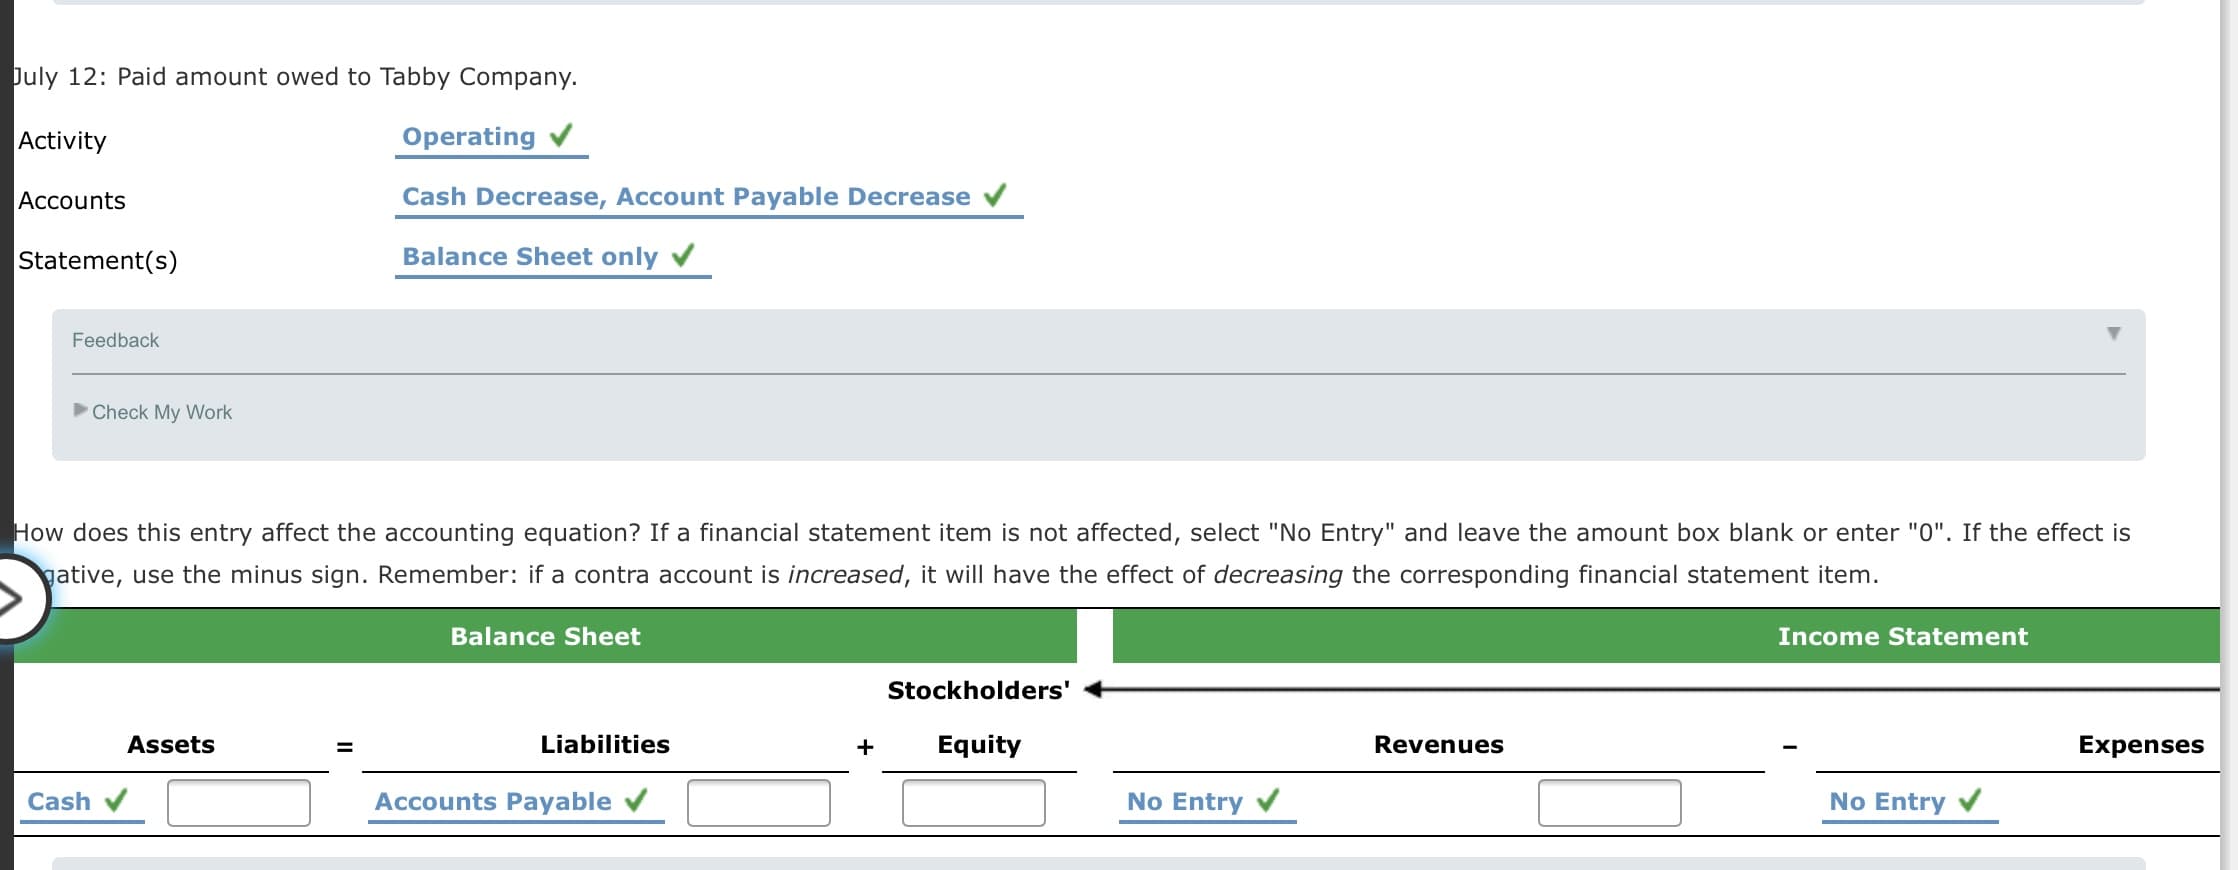 July 12: Paid amount owed to Tabby Company.
Activity
Operating v
Accounts
Cash Decrease, Account Payable Decrease
Statement(s)
Balance Sheet only v
Feedback
Check My Work
How does this entry affect the accounting equation? If a financial statement item is not affected, select "No Entry" and leave the amount box blank or enter "0". If the effect is
gative, use the minus sign. Remember: if a contra account is increased, it will have the effect of decreasing the corresponding financial statement item.
